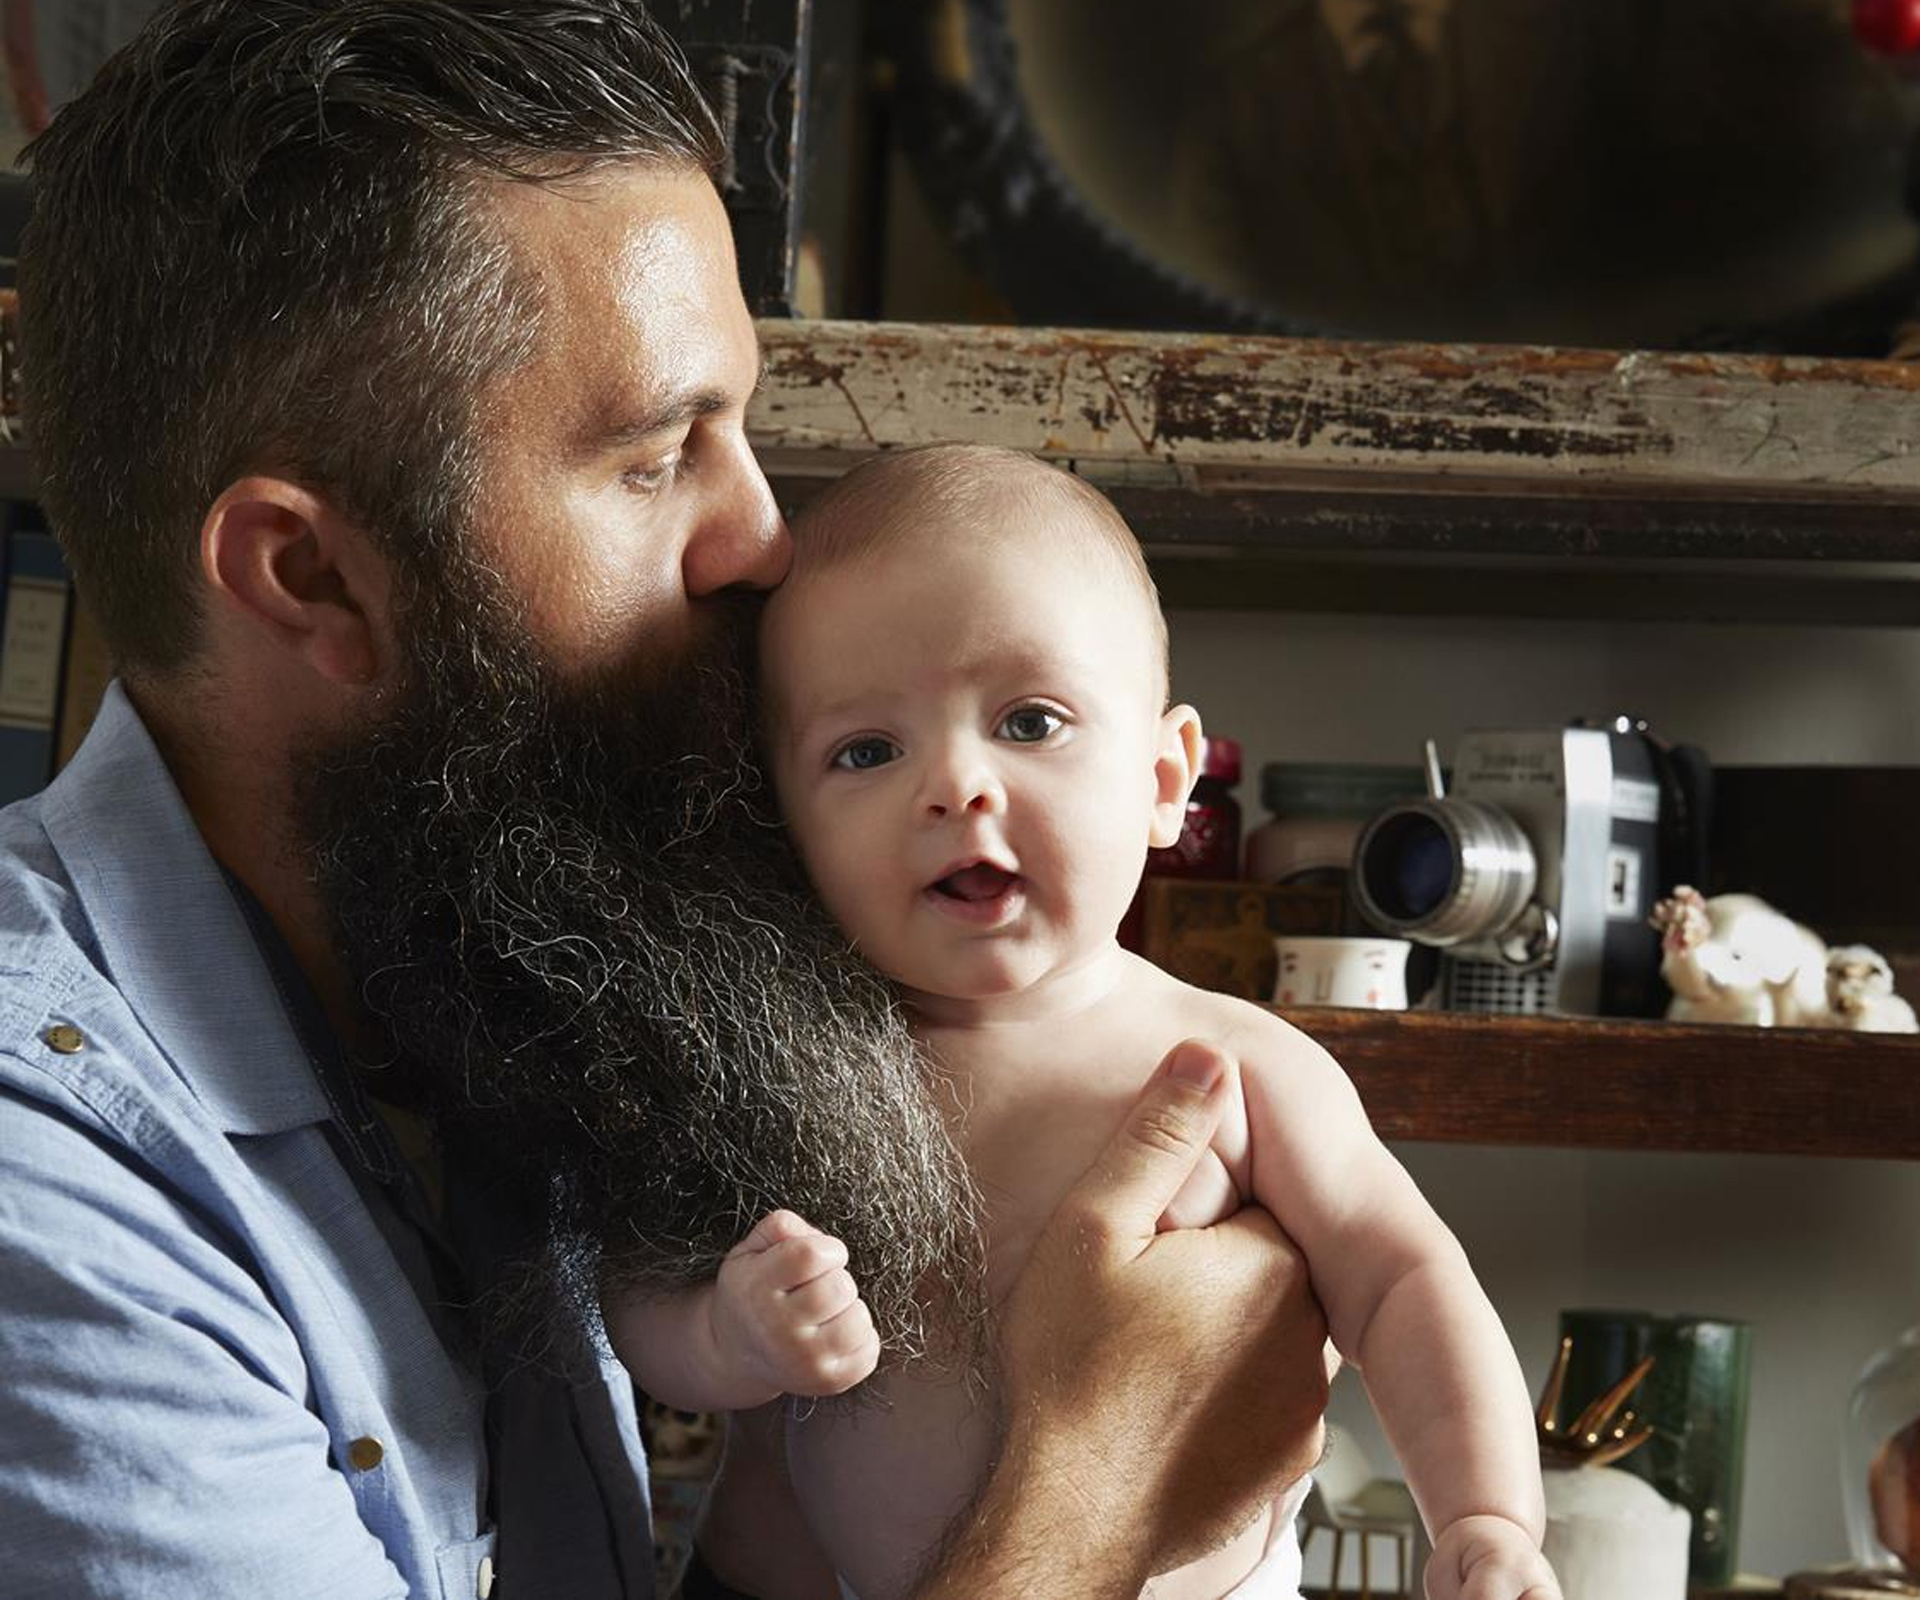 Hipster fathers don't want to be called 'dad'